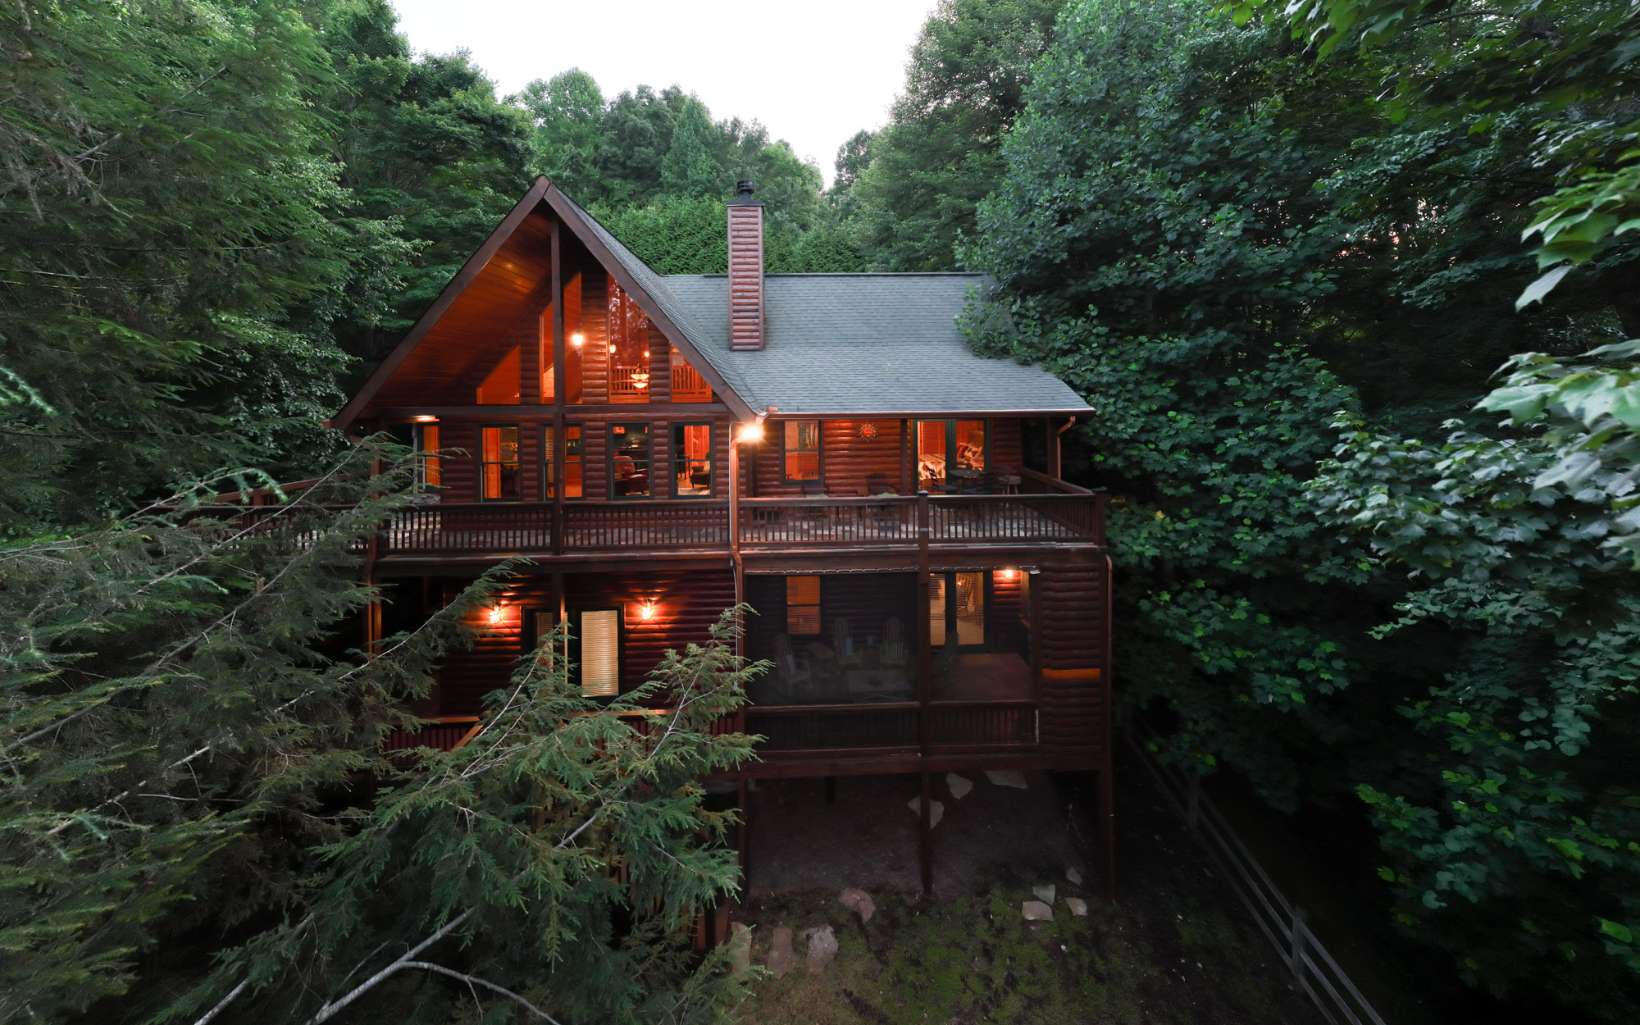 Picturesque mountain views in an exclusive Blue Ridge neighborhood. This upscale cabin is surrounded by mature hardwoods, providing ultimate privacy. Situated on a 3 acre lot w/ 4 beds & 4 full baths, there is room for the whole family. The soaring ceilings and large fixed glass windows allow natural light to fill the home. On the main level you will find an open concept kitchen & living room & the master suite, featuring a stacked stone gas fireplace. W/ layered, long range mountain views, you’ll find yourself wanting to spend all your time on the porches! The terrace level offers an additional family room, screened porch w/ outdoor fireplace & stairs leading to the fenced yard. Cohutta Ranch Subdivision offers gated entry, a large pond, a 6-stall horse barn & fenced pastures in the heart of the Cohutta Mountains. Being sold turn-key, this incredible cabin is ready for you!!